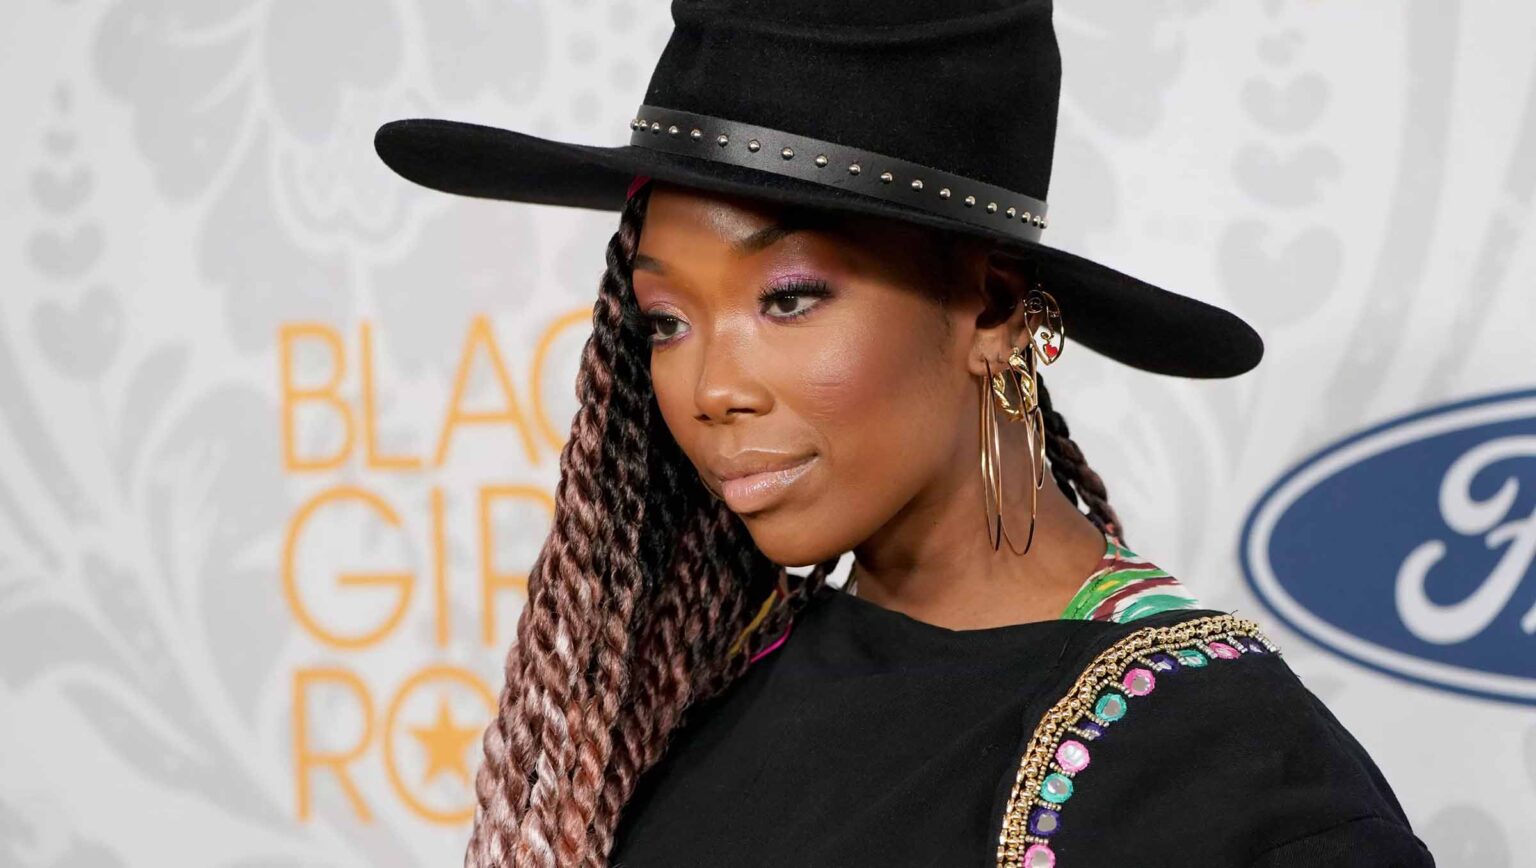 Legendary singer and actress Brandy is back on ABC for the first time since 'Rodgers and Hammerstein's Cinderella'. Find out all the deets on the new show.